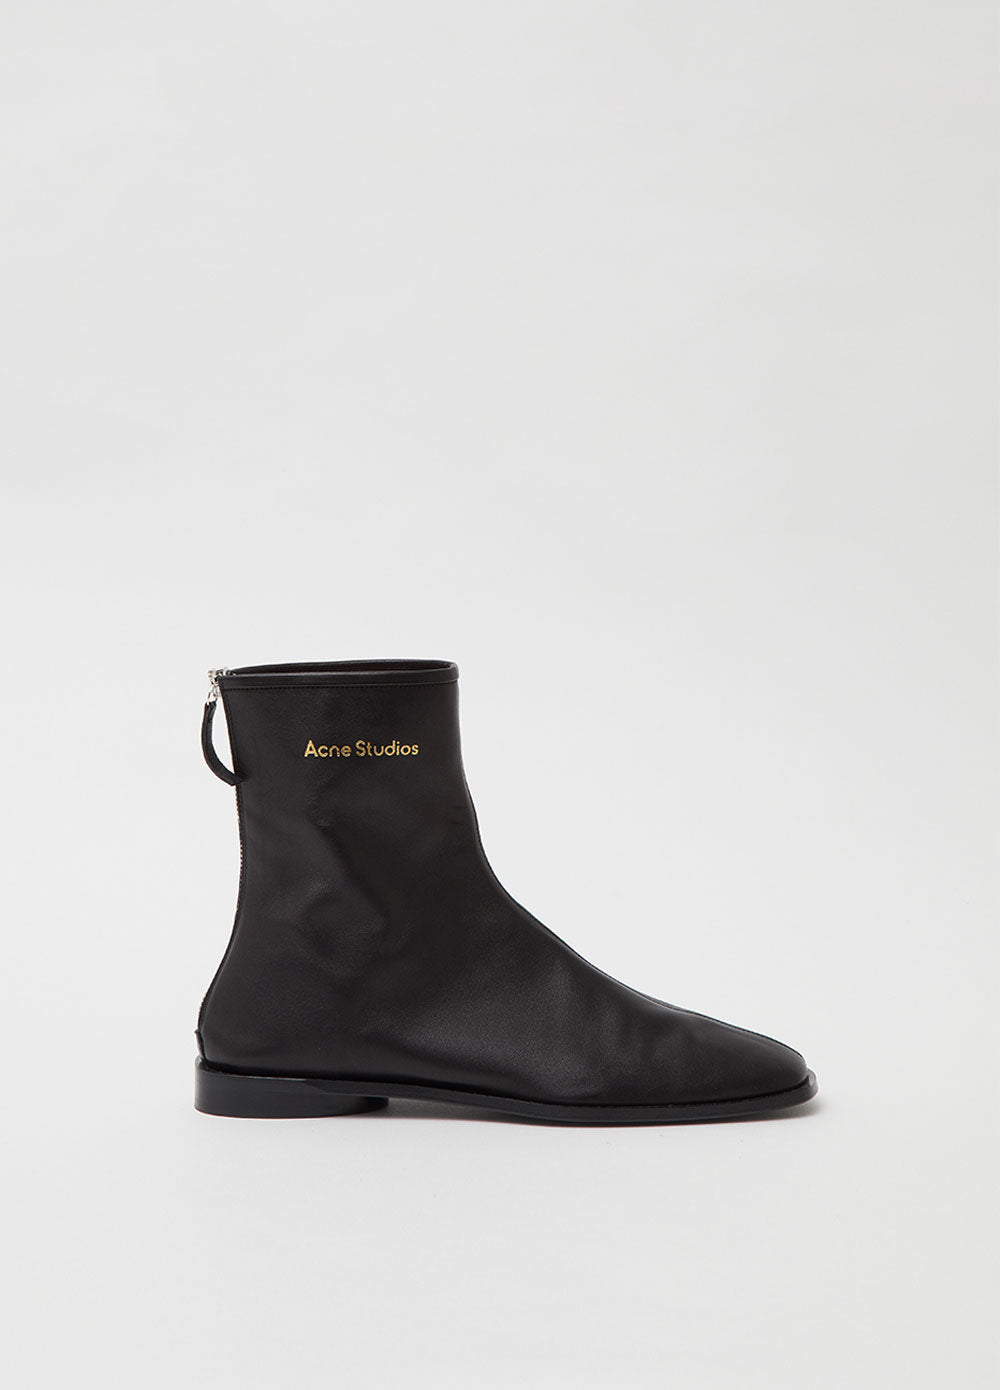 acne flat boots